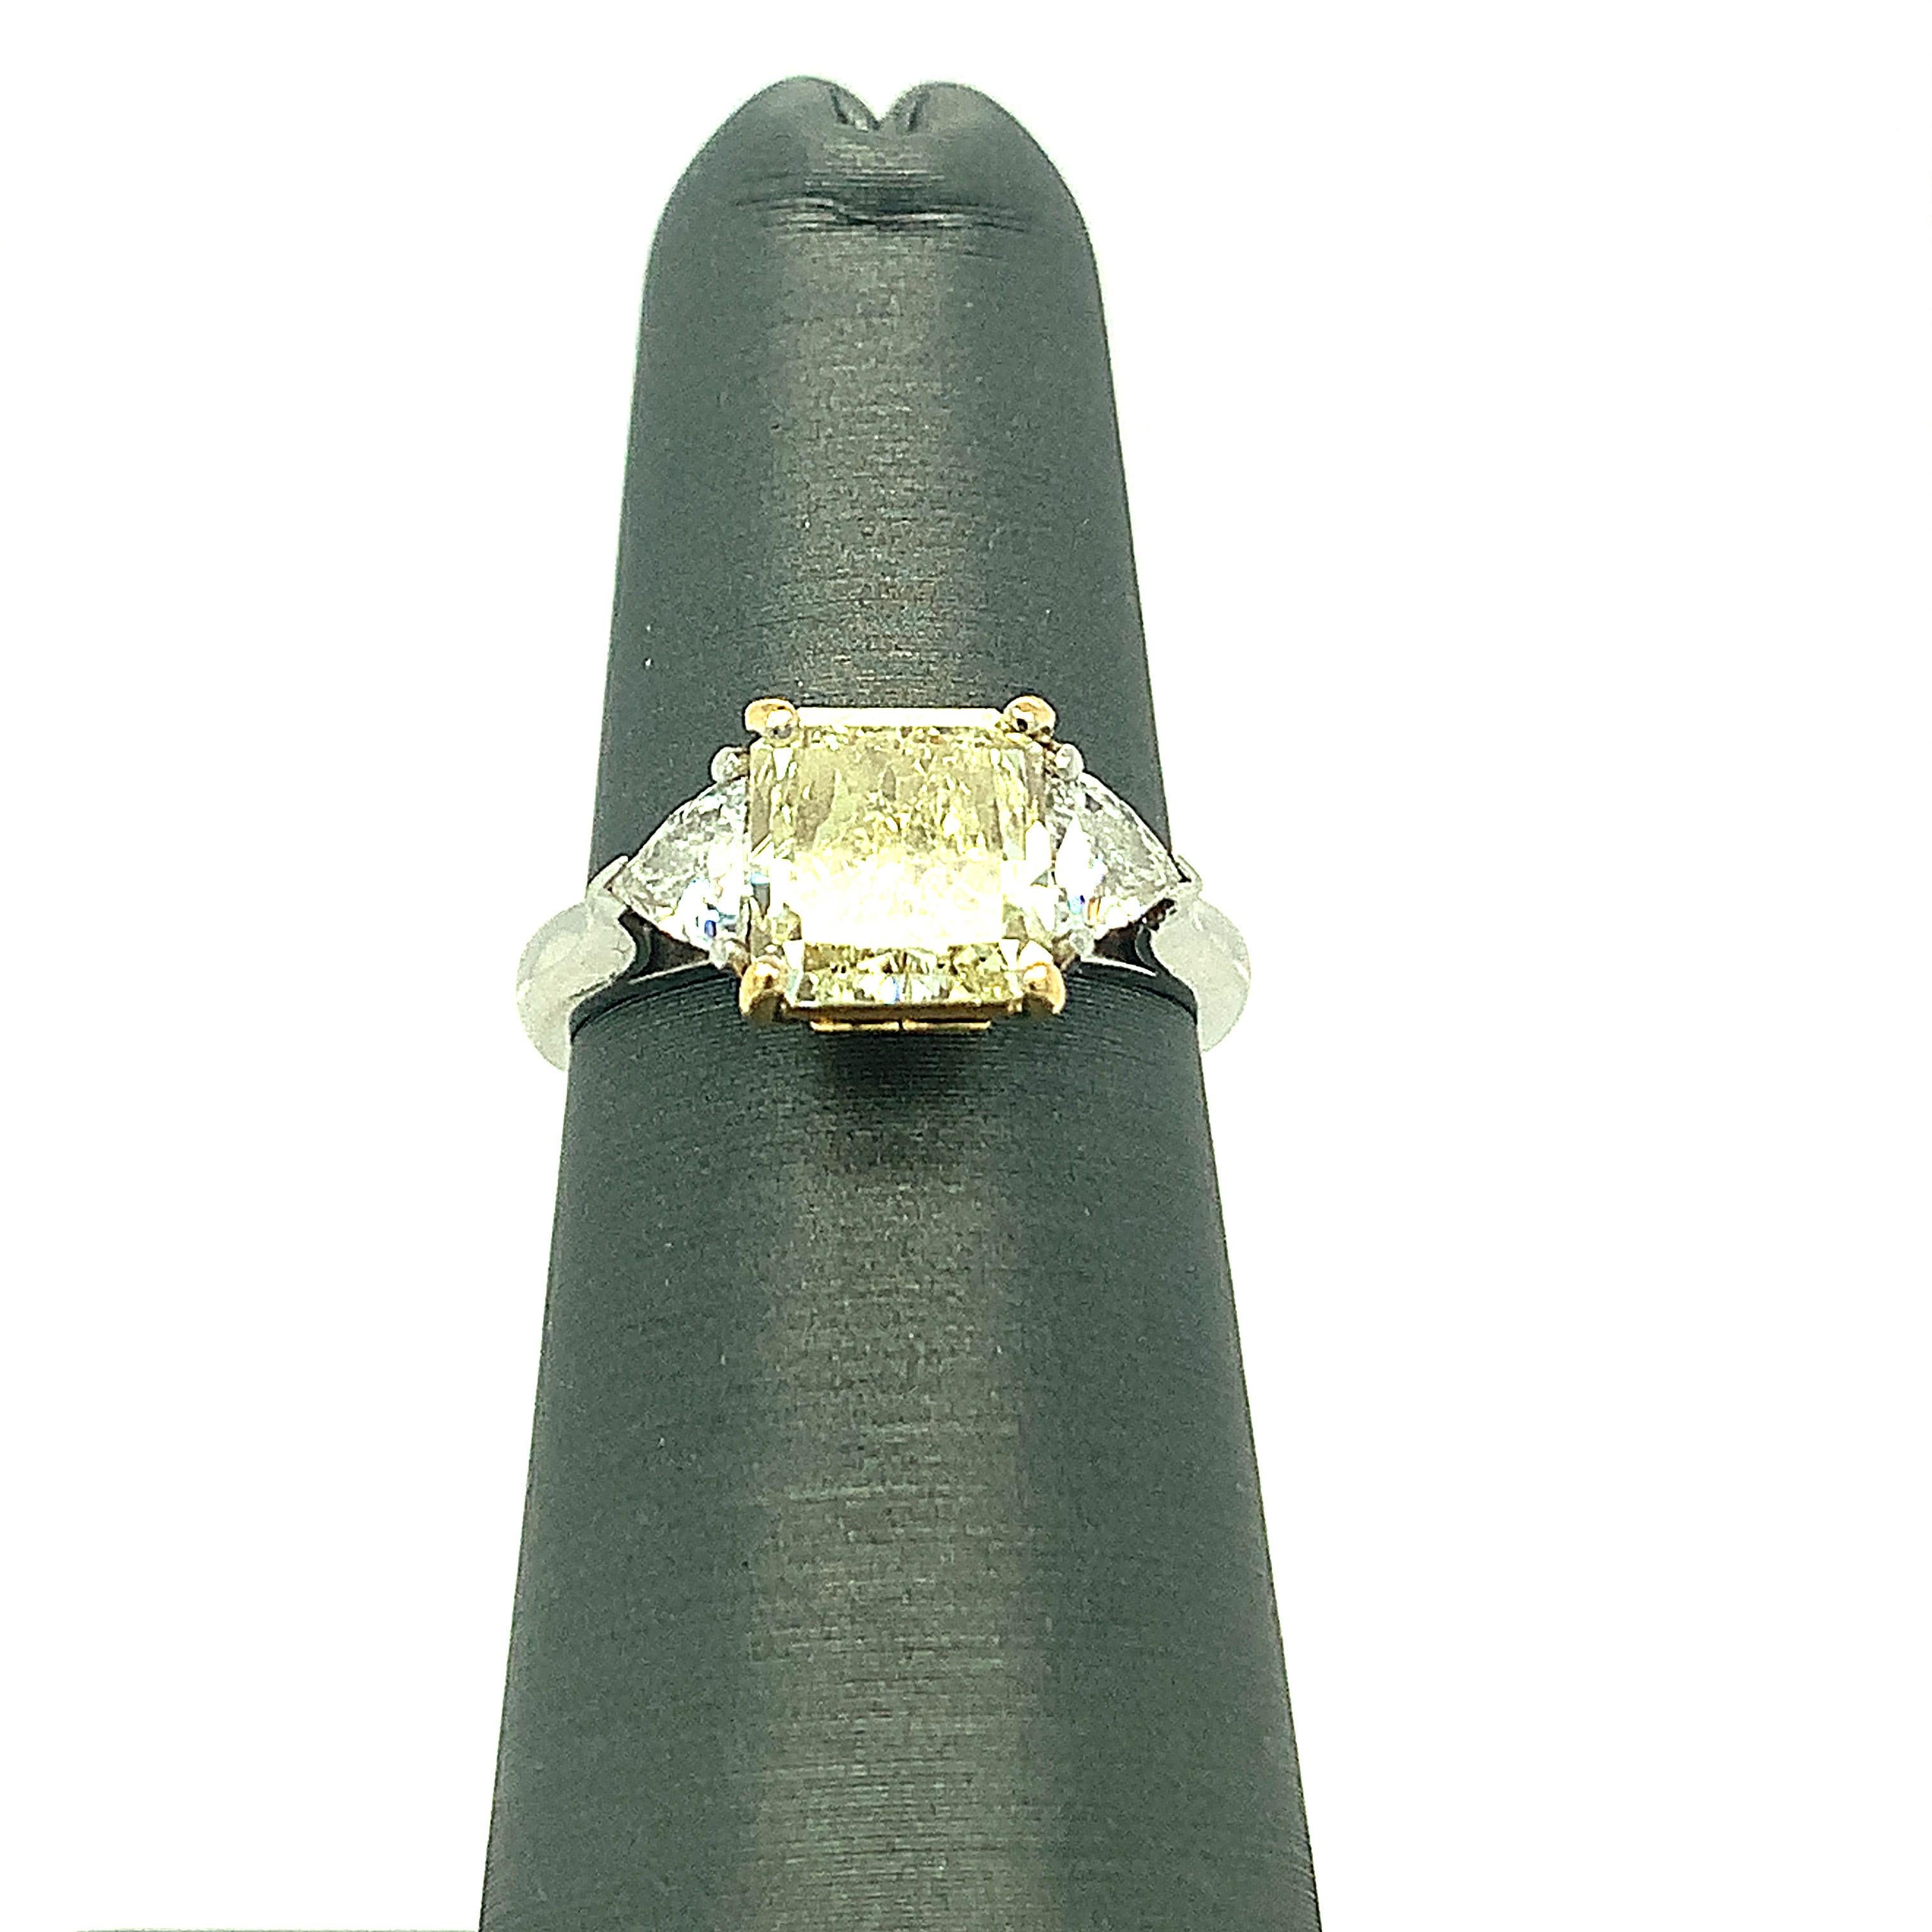 1.83 Carat Cornered Square cut Fancy Light Yellow Diamond is accompanied with a GIA certificate. This brilliant center stone sits on 18K yellow gold mount with platinum band. Two perfectly matched white trillion cut diamonds on sides enhances its